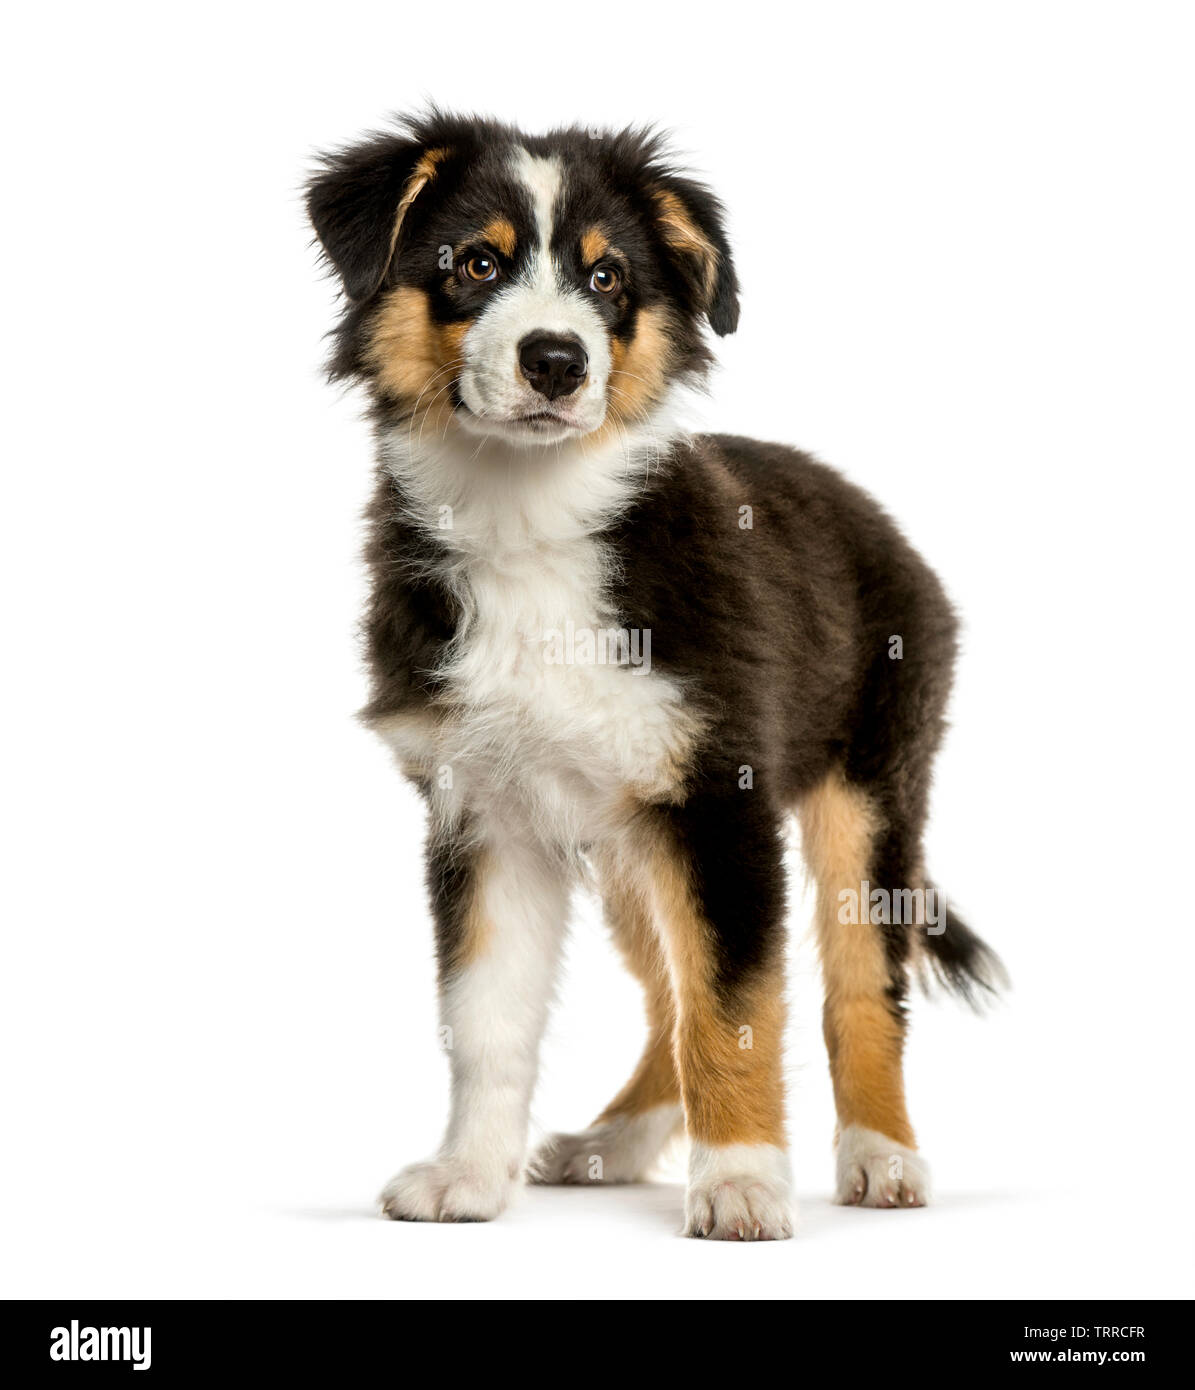 Shepherd dog puppy standing Cut Out Stock Images & Pictures - Page 3 - Alamy